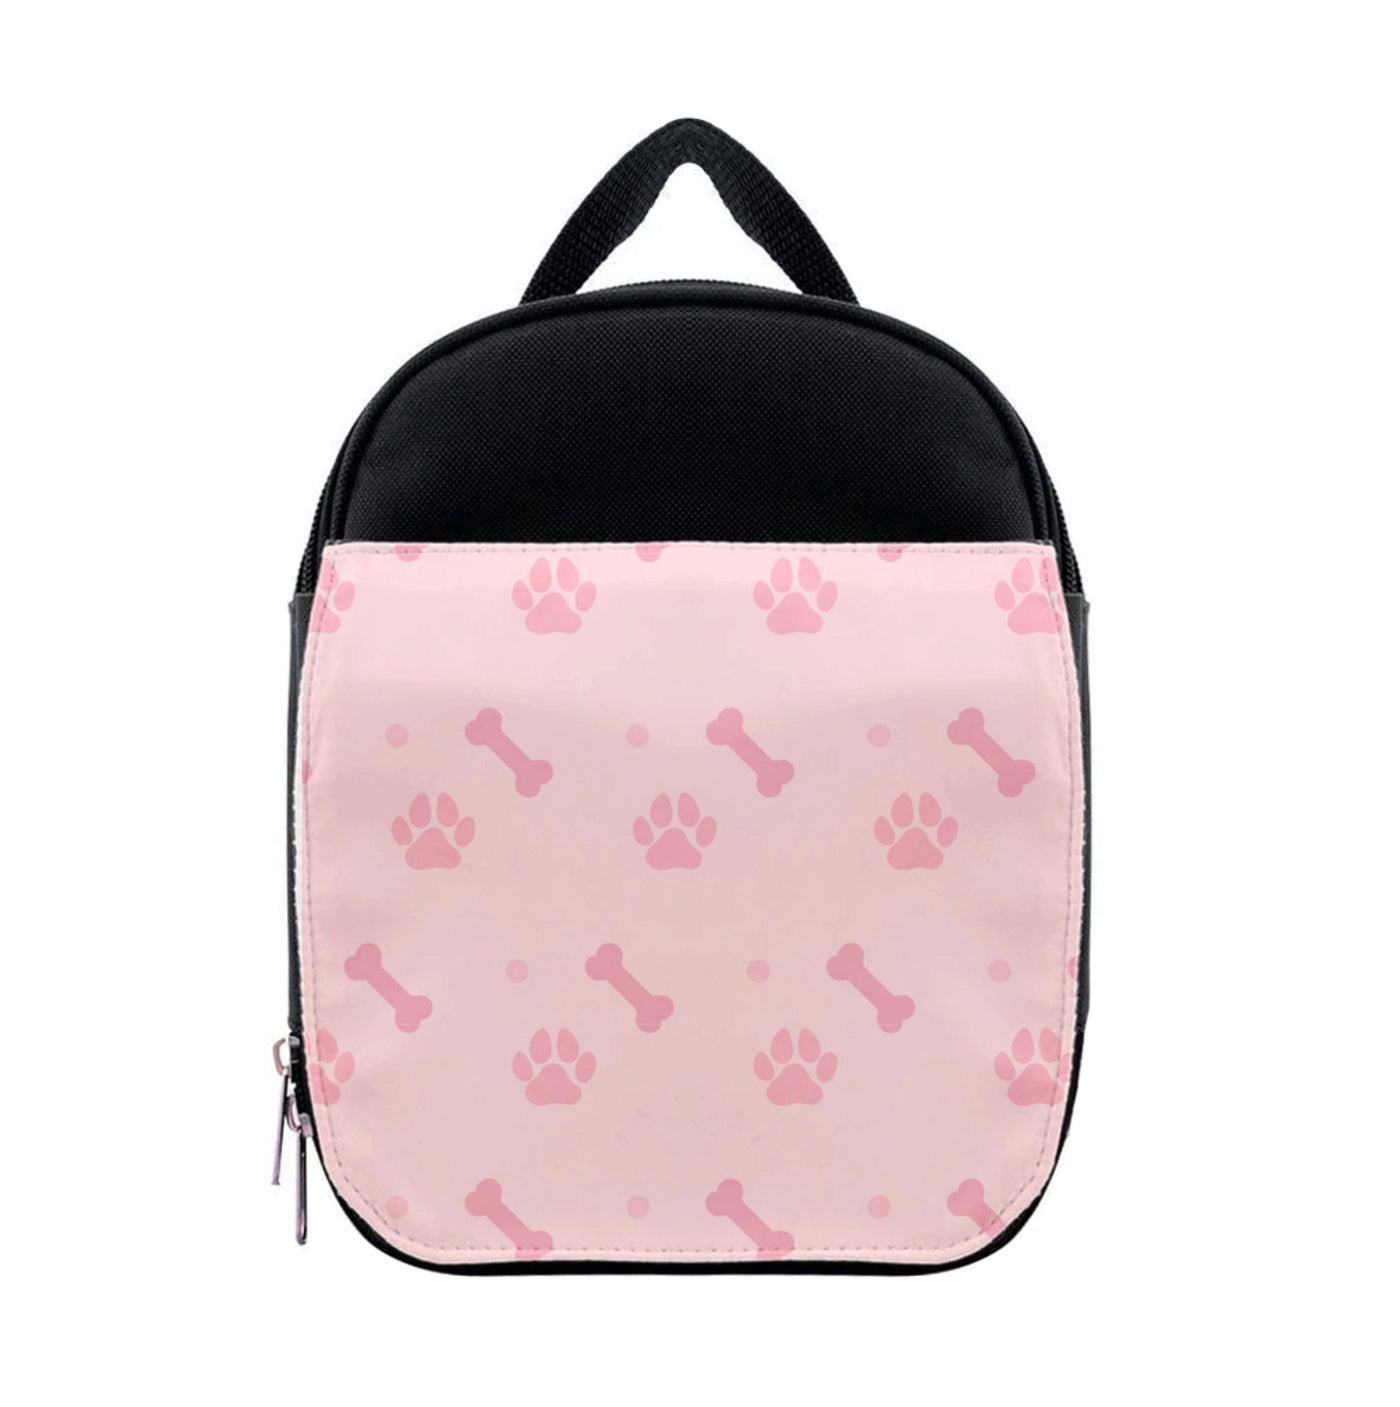 Dog And Paw - Dog Pattern Lunchbox